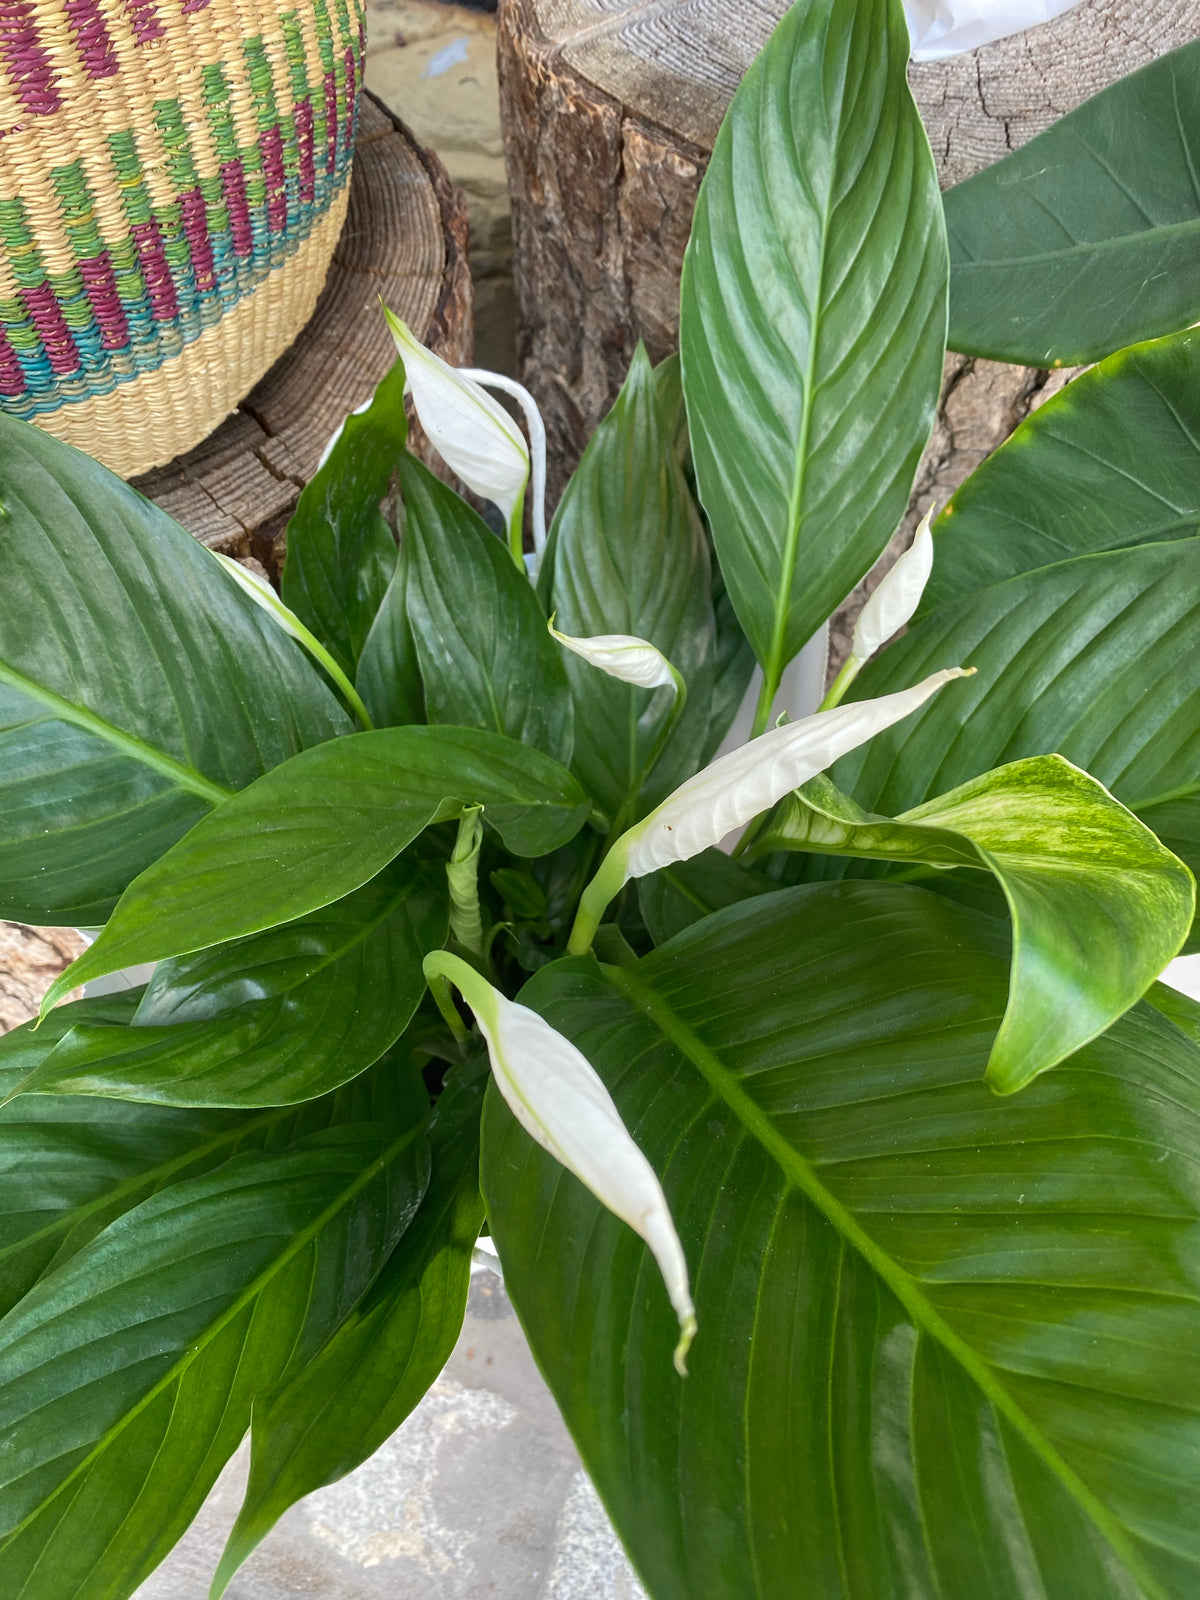 Peace Lilly (Spathiphyllum)